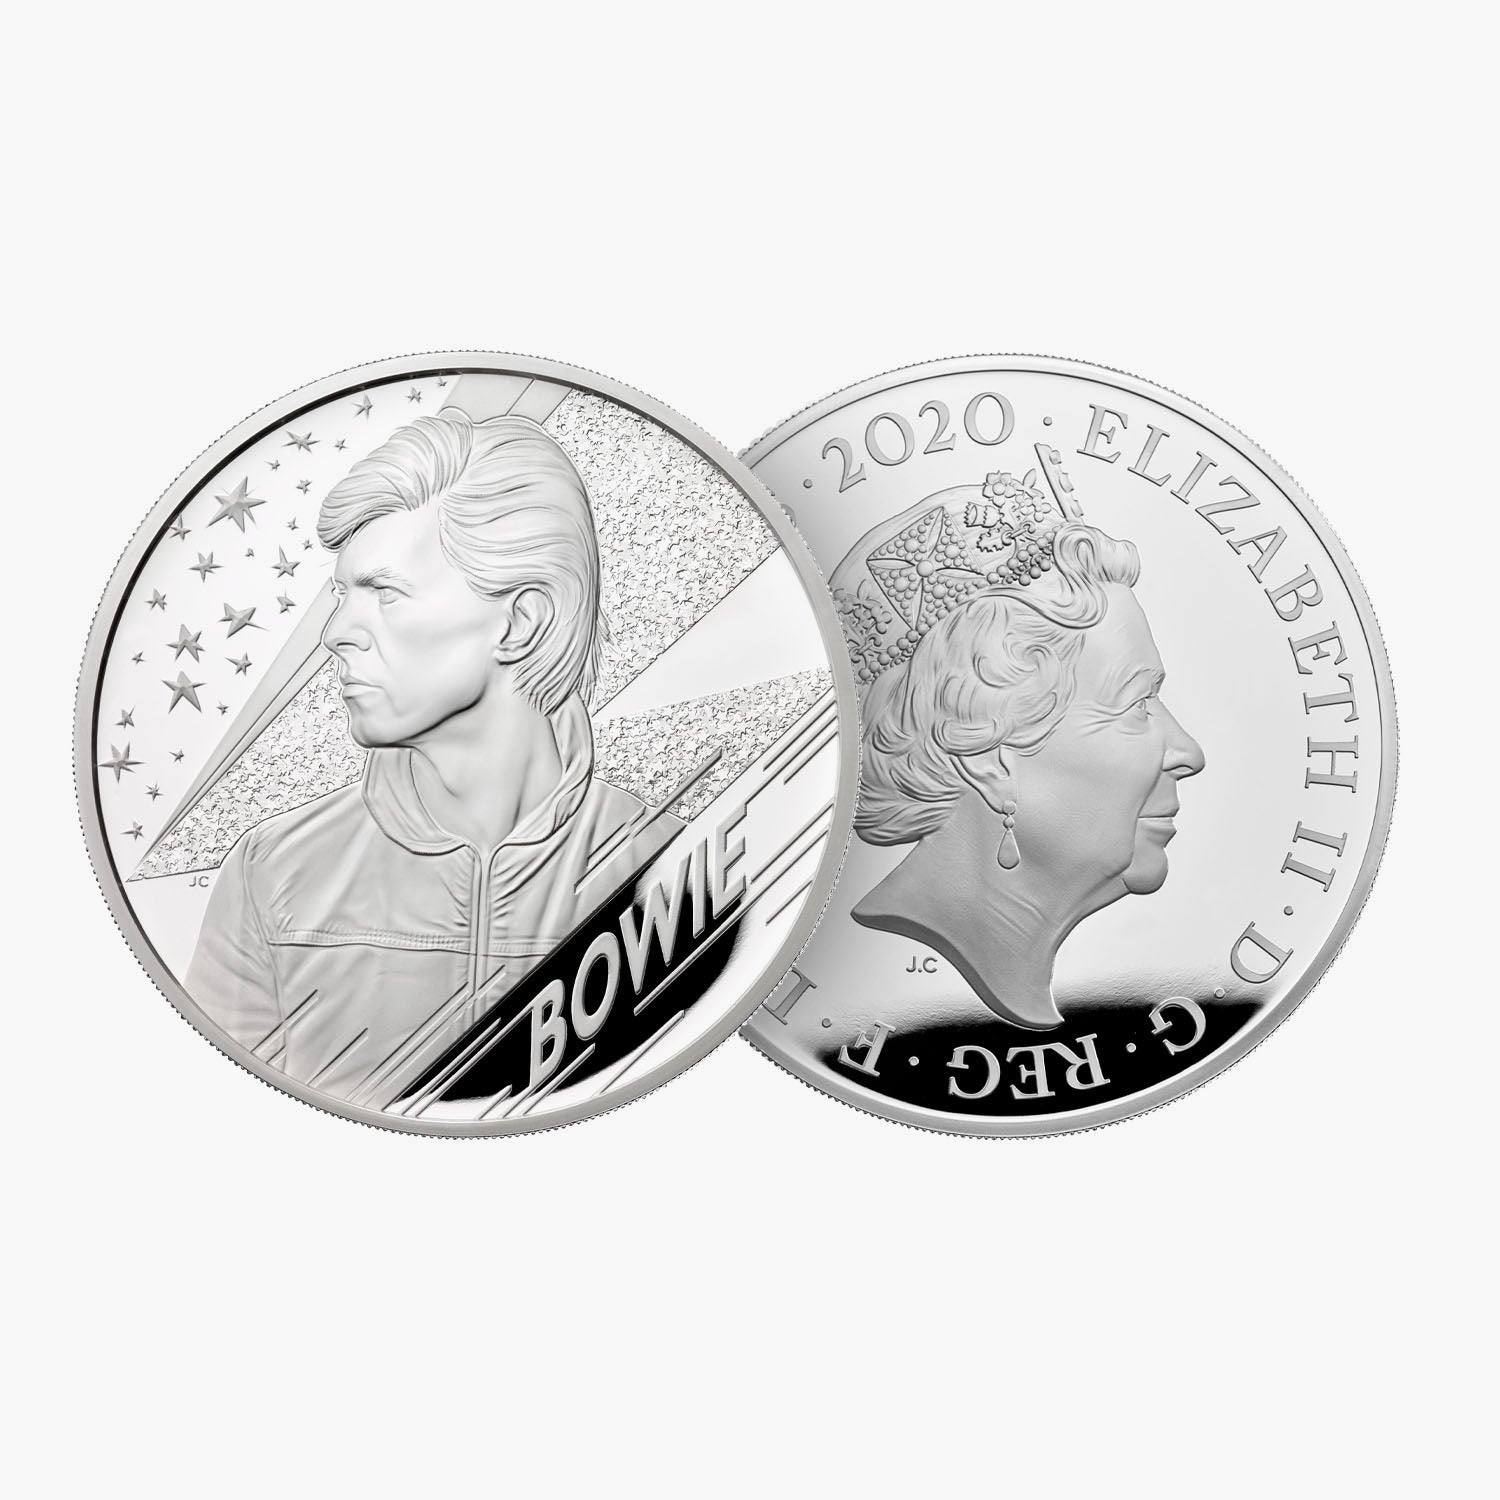 David Bowie 2020 UK Five Ounce Silver Proof Coin